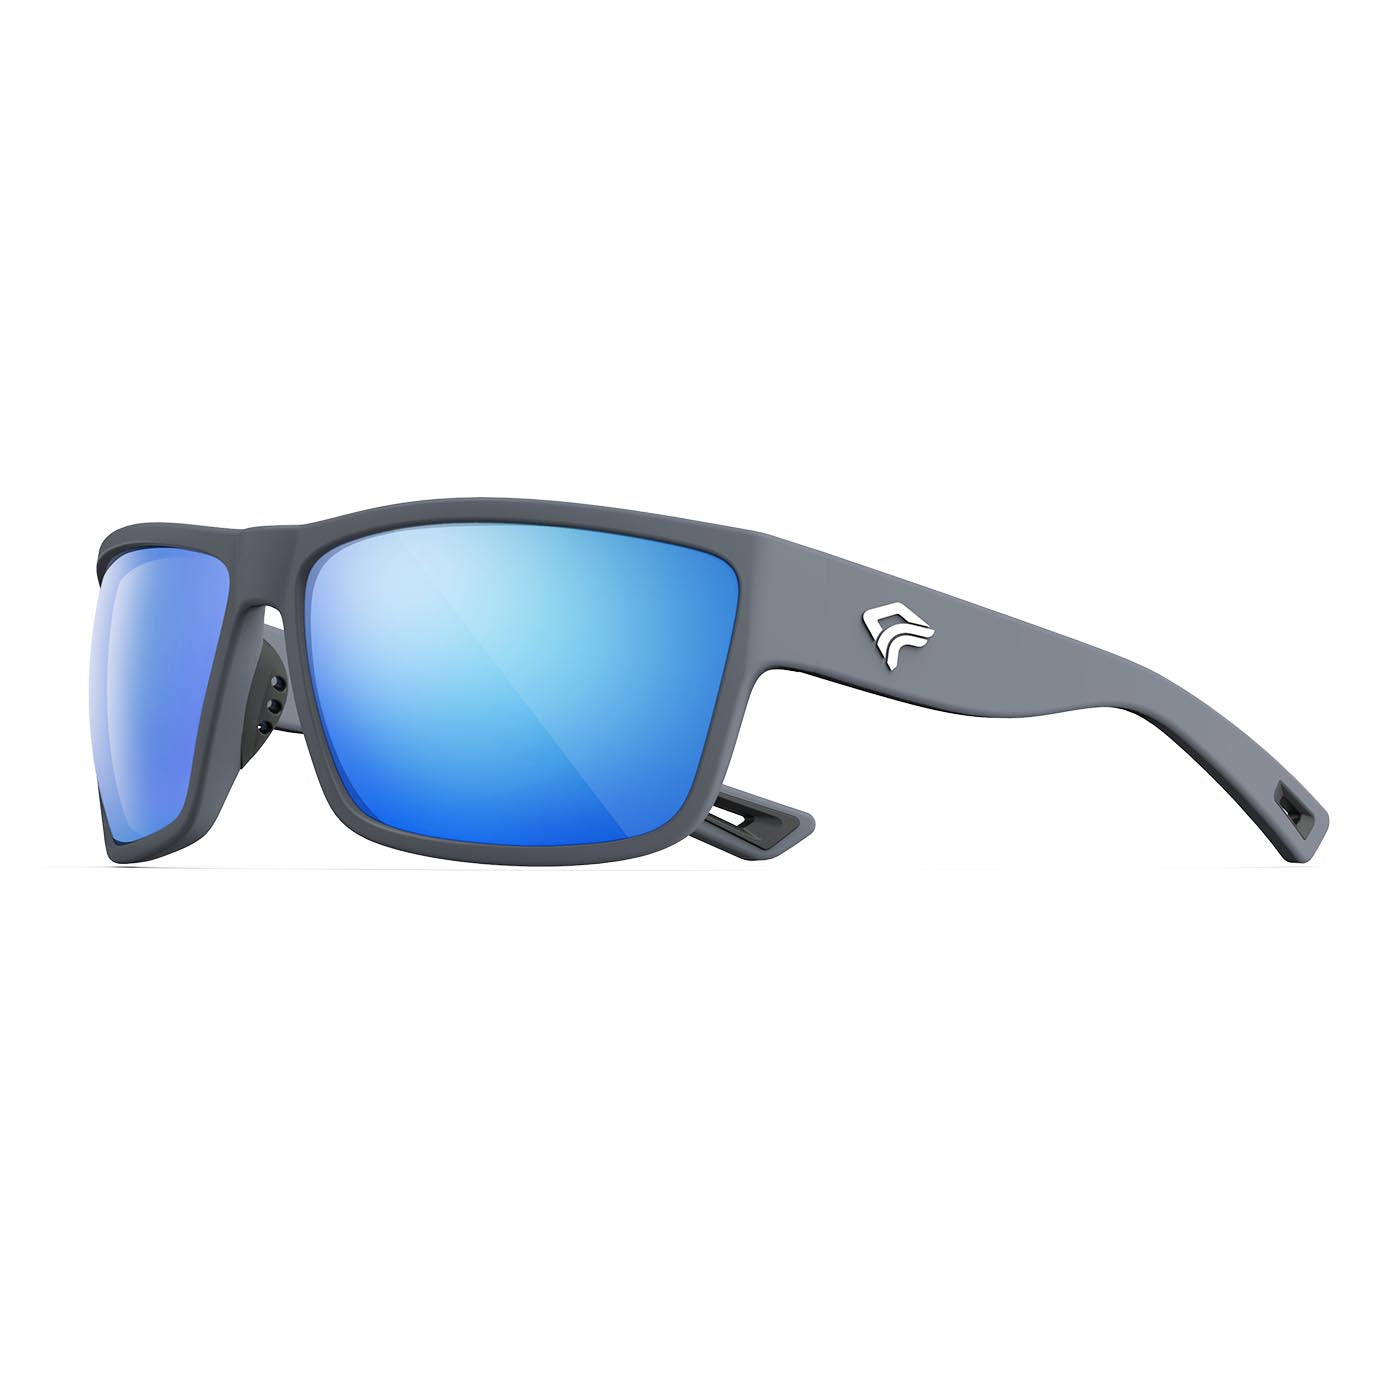 Fishing To Sunglasses Men Golf, and Frame Adjustable Lifetime and Flexible Ideal Transparent - Women - for for Warranty Half Pure - Cycling, Matte Polarized Sports Running, Ideal and - with Grey